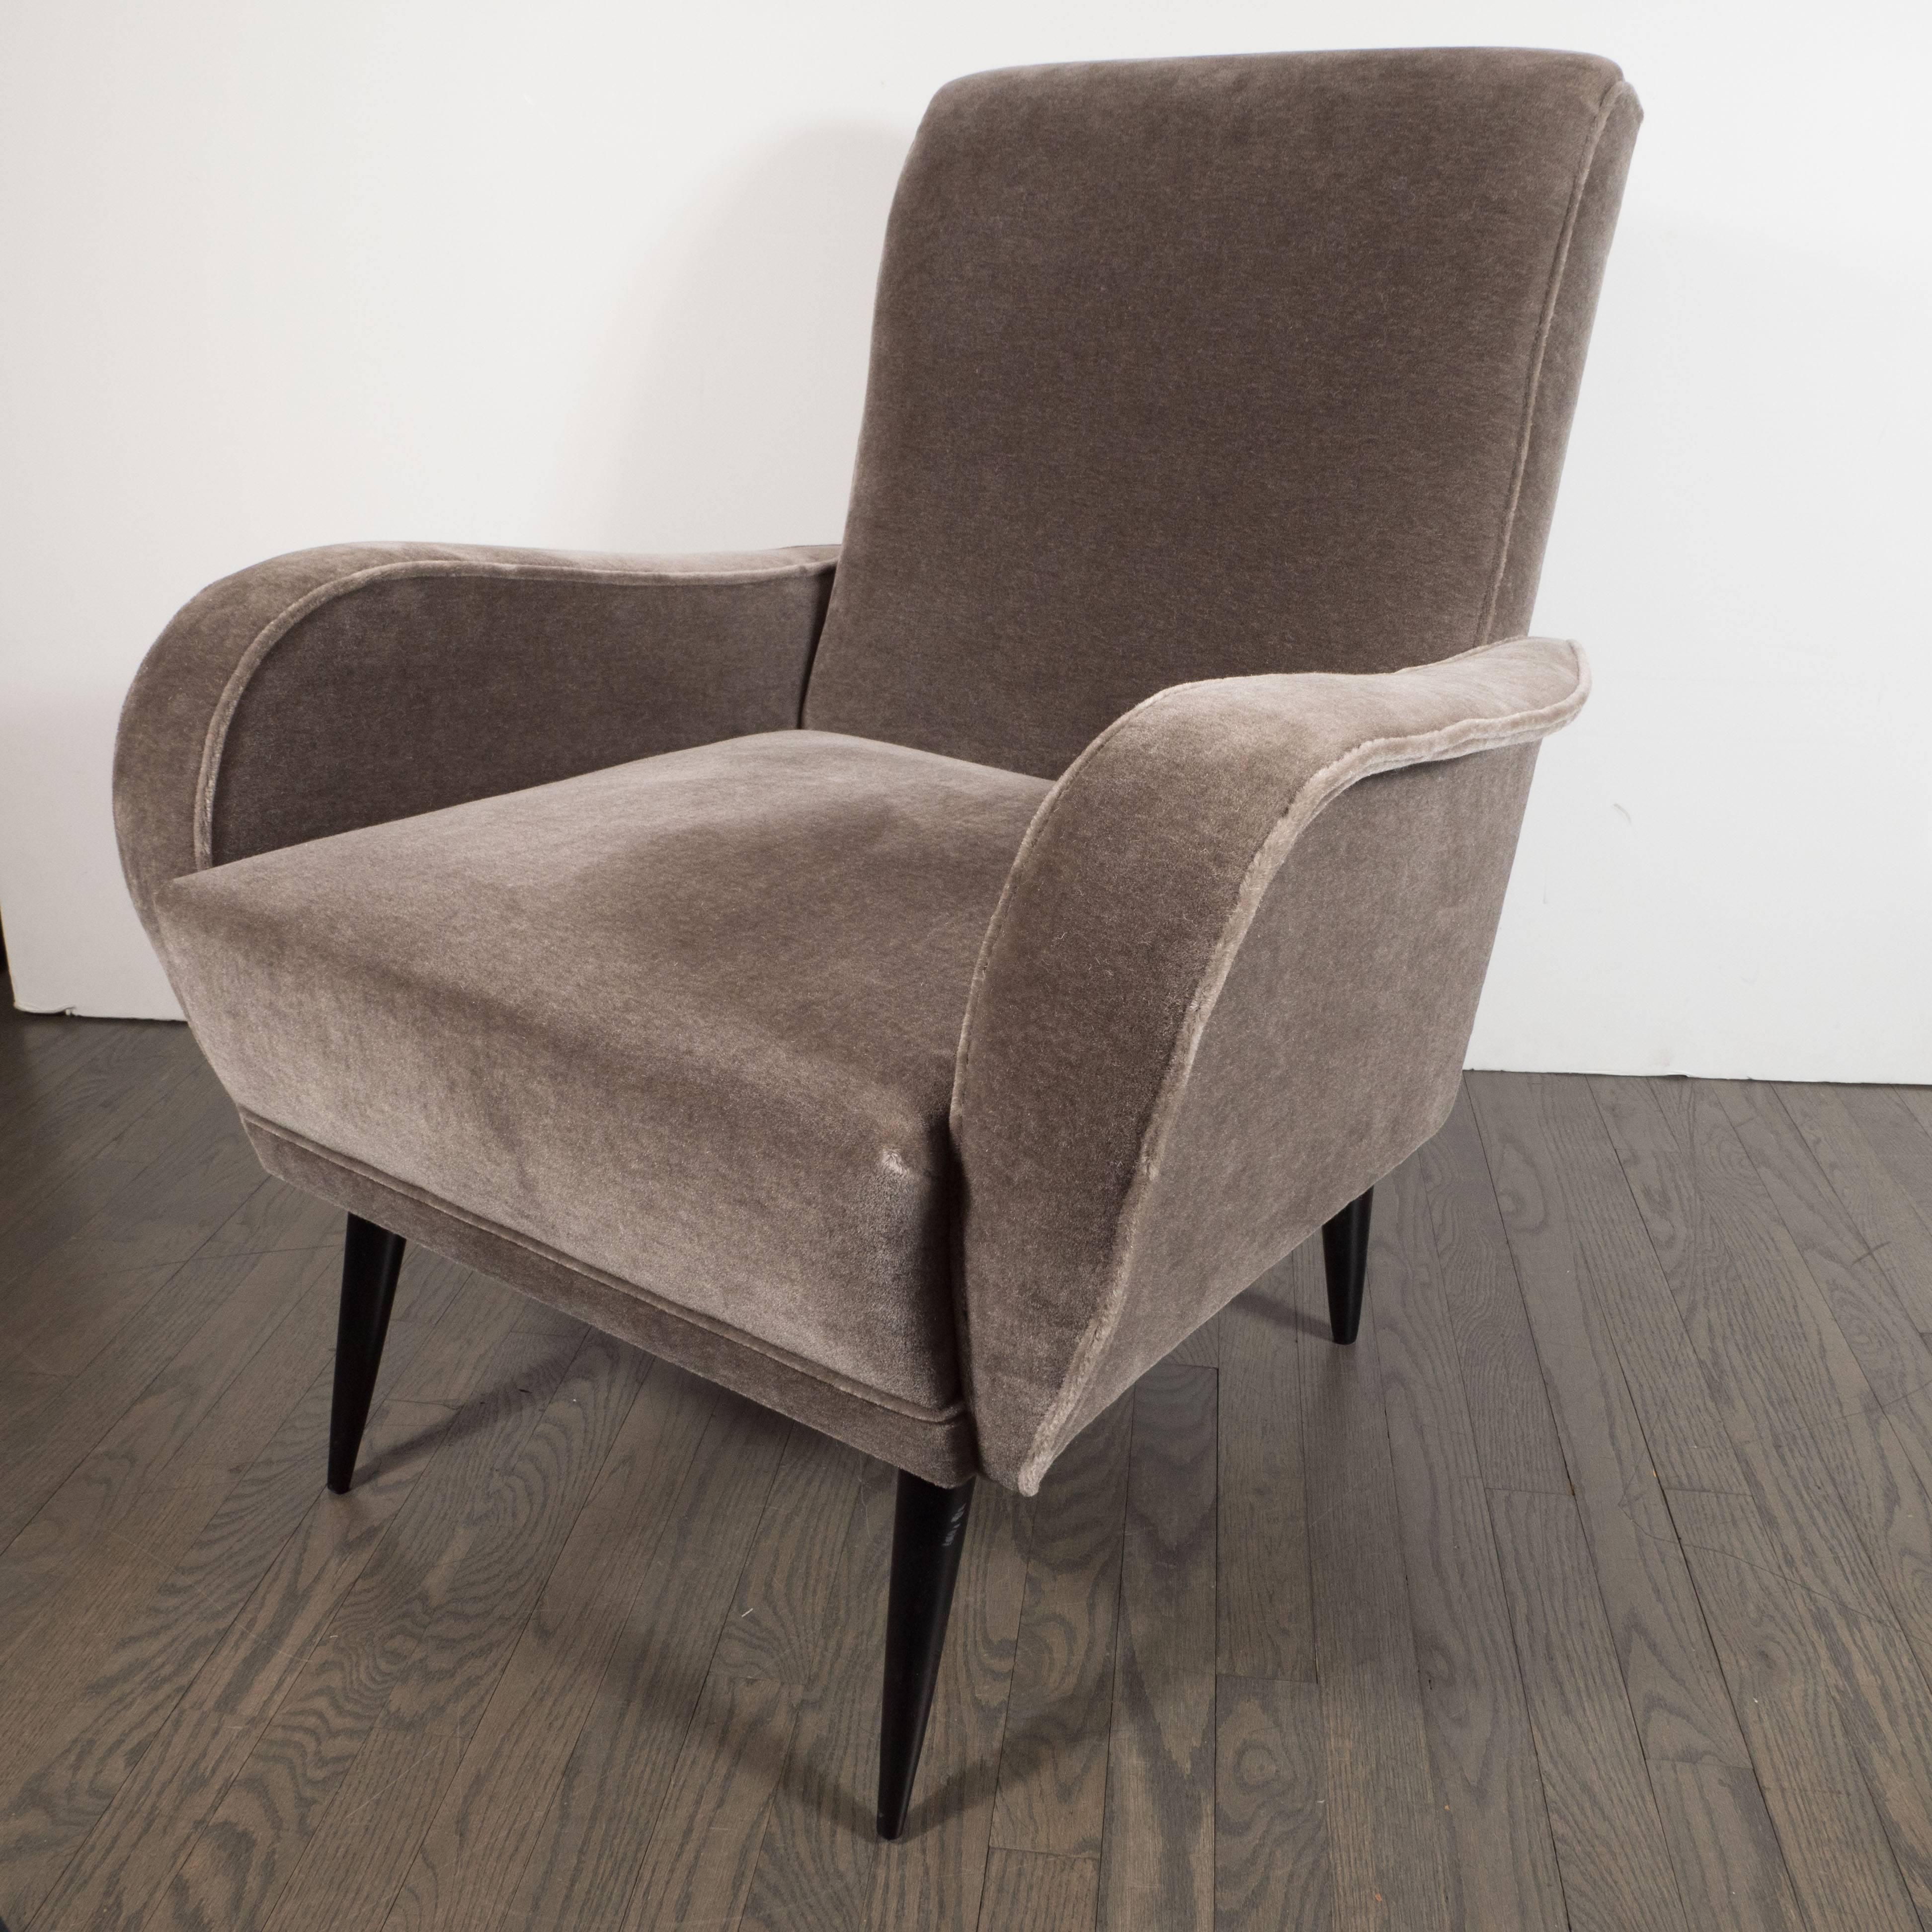 These elegant lounge chairs were realized in Italy, circa 1950. Realized in the manner of Marco Zanuso, they feature gently tapered backs; conical ebonized walnut legs; and streamlined arms whose outer edge dramatically flares out, resembling